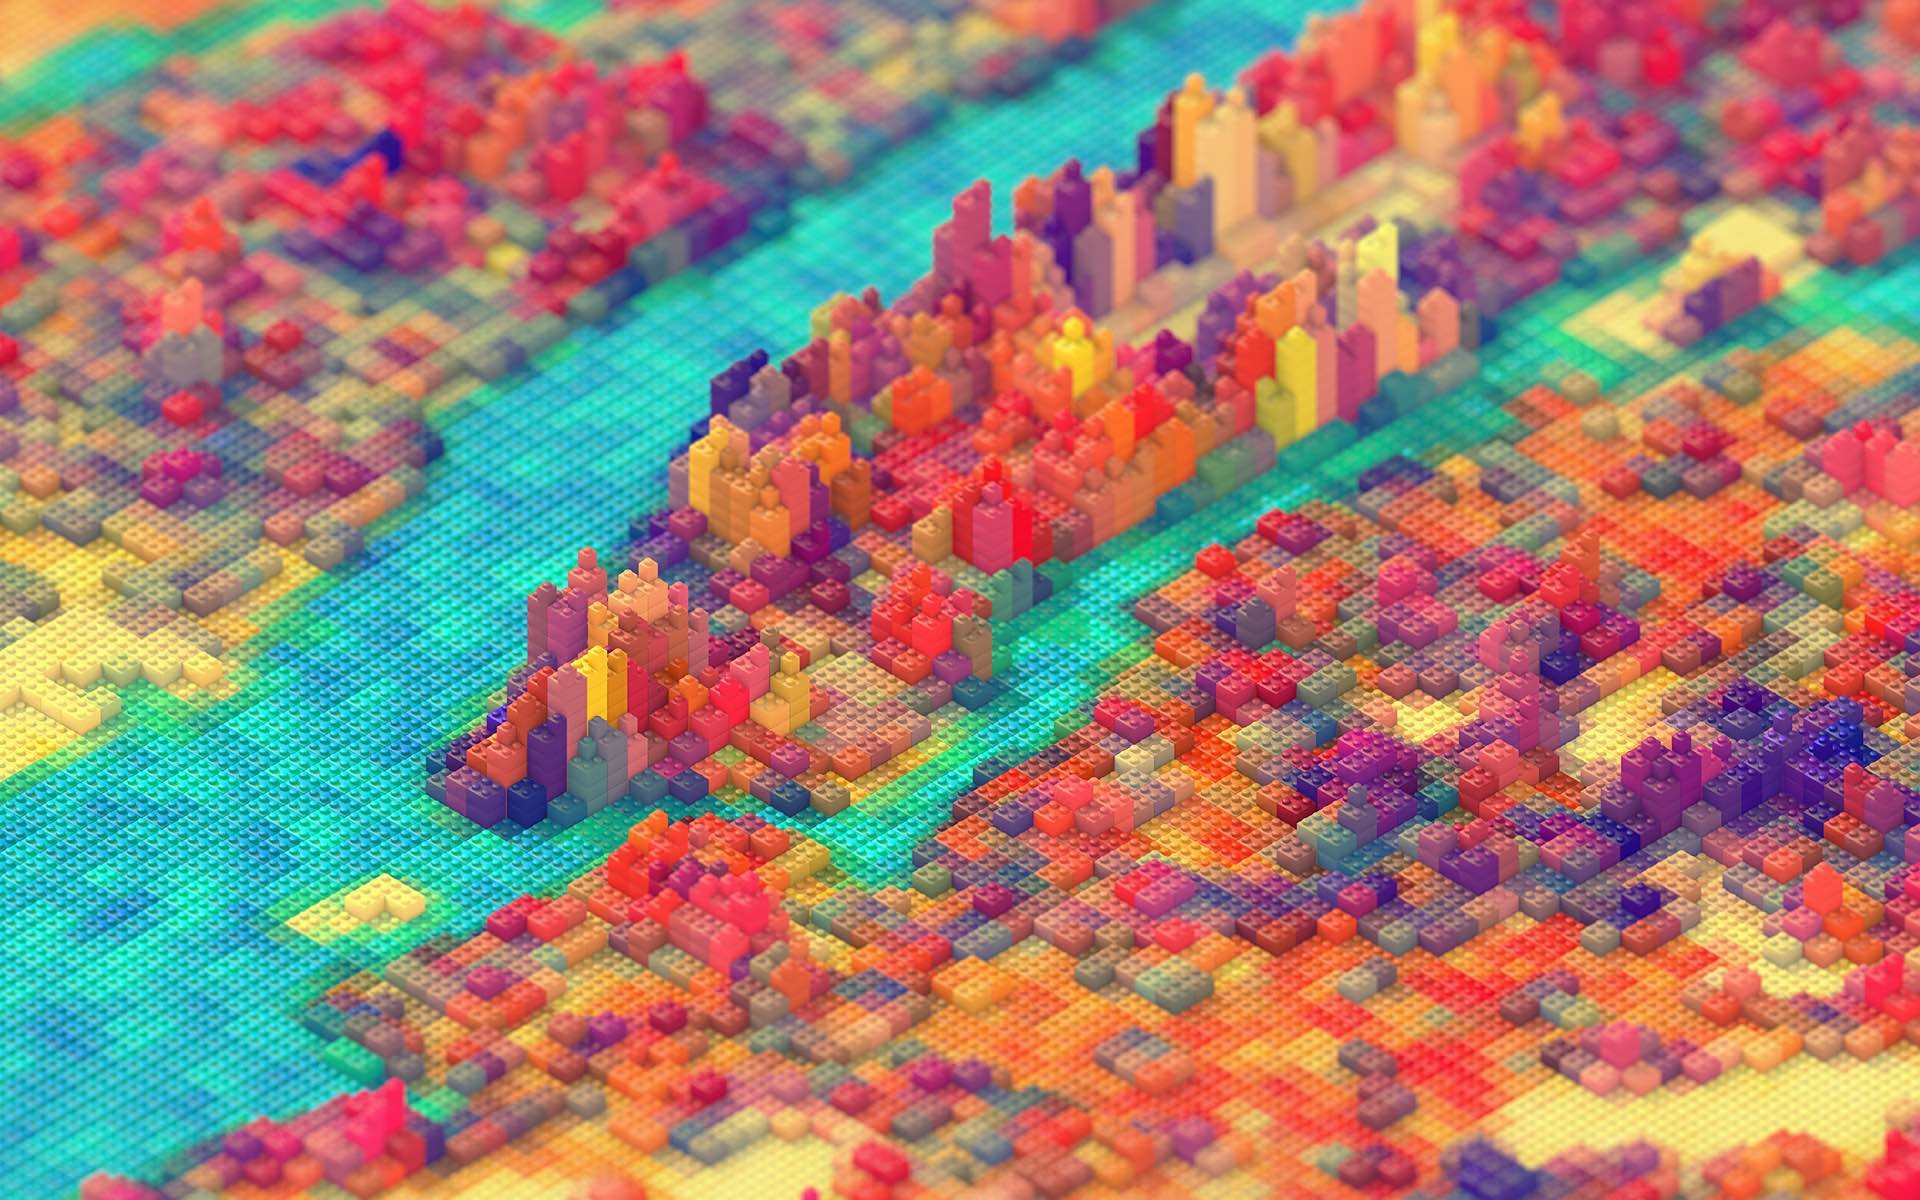 Lego New York print by J.R. Schmidt (Prices vary based on size and material)